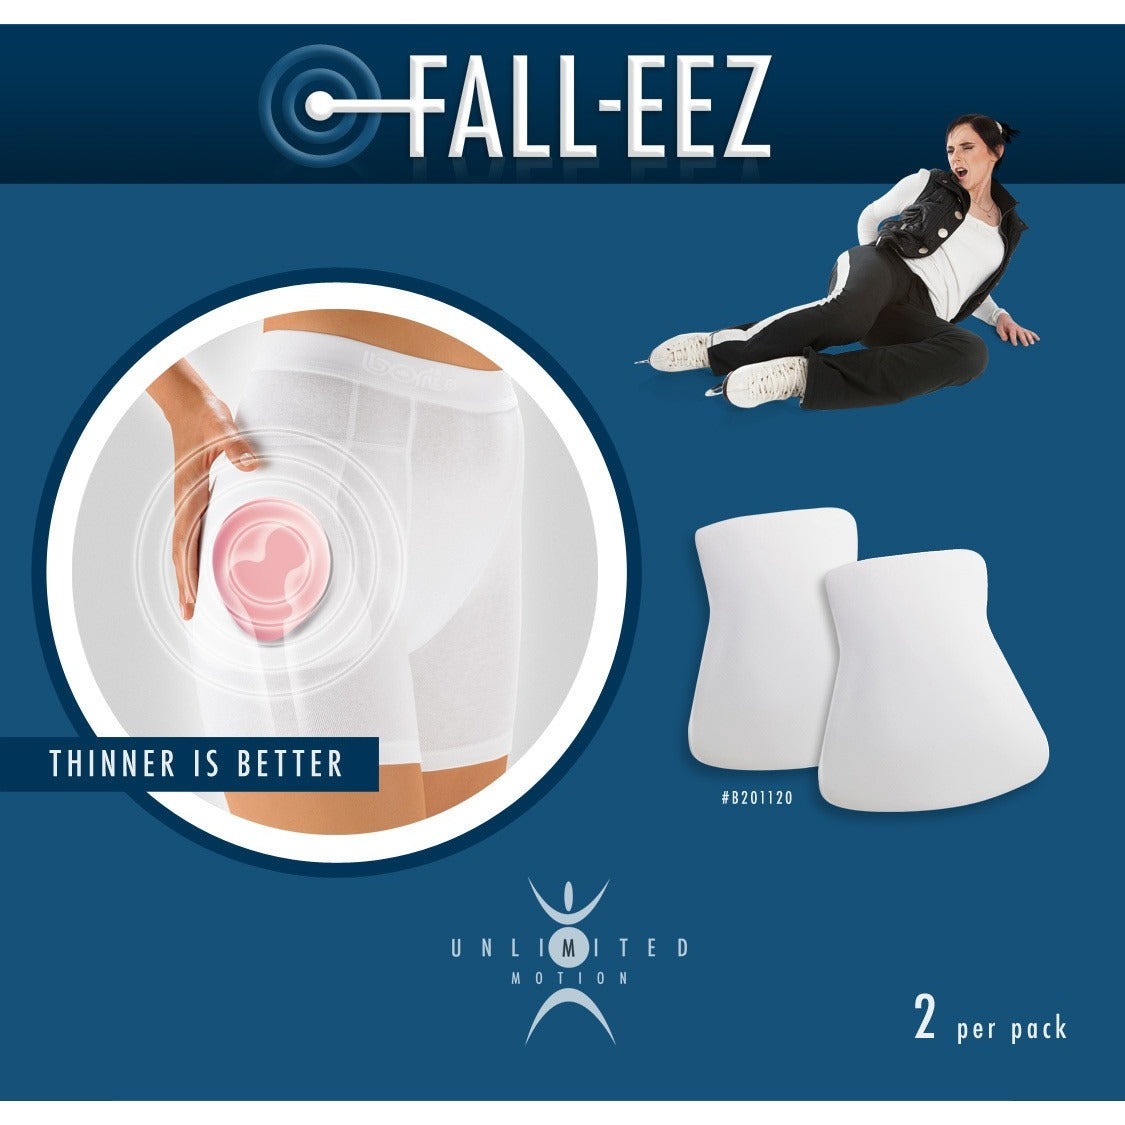 Unlimited Motion - Fall Eez Hip Pads - The Sharper Edge Skates